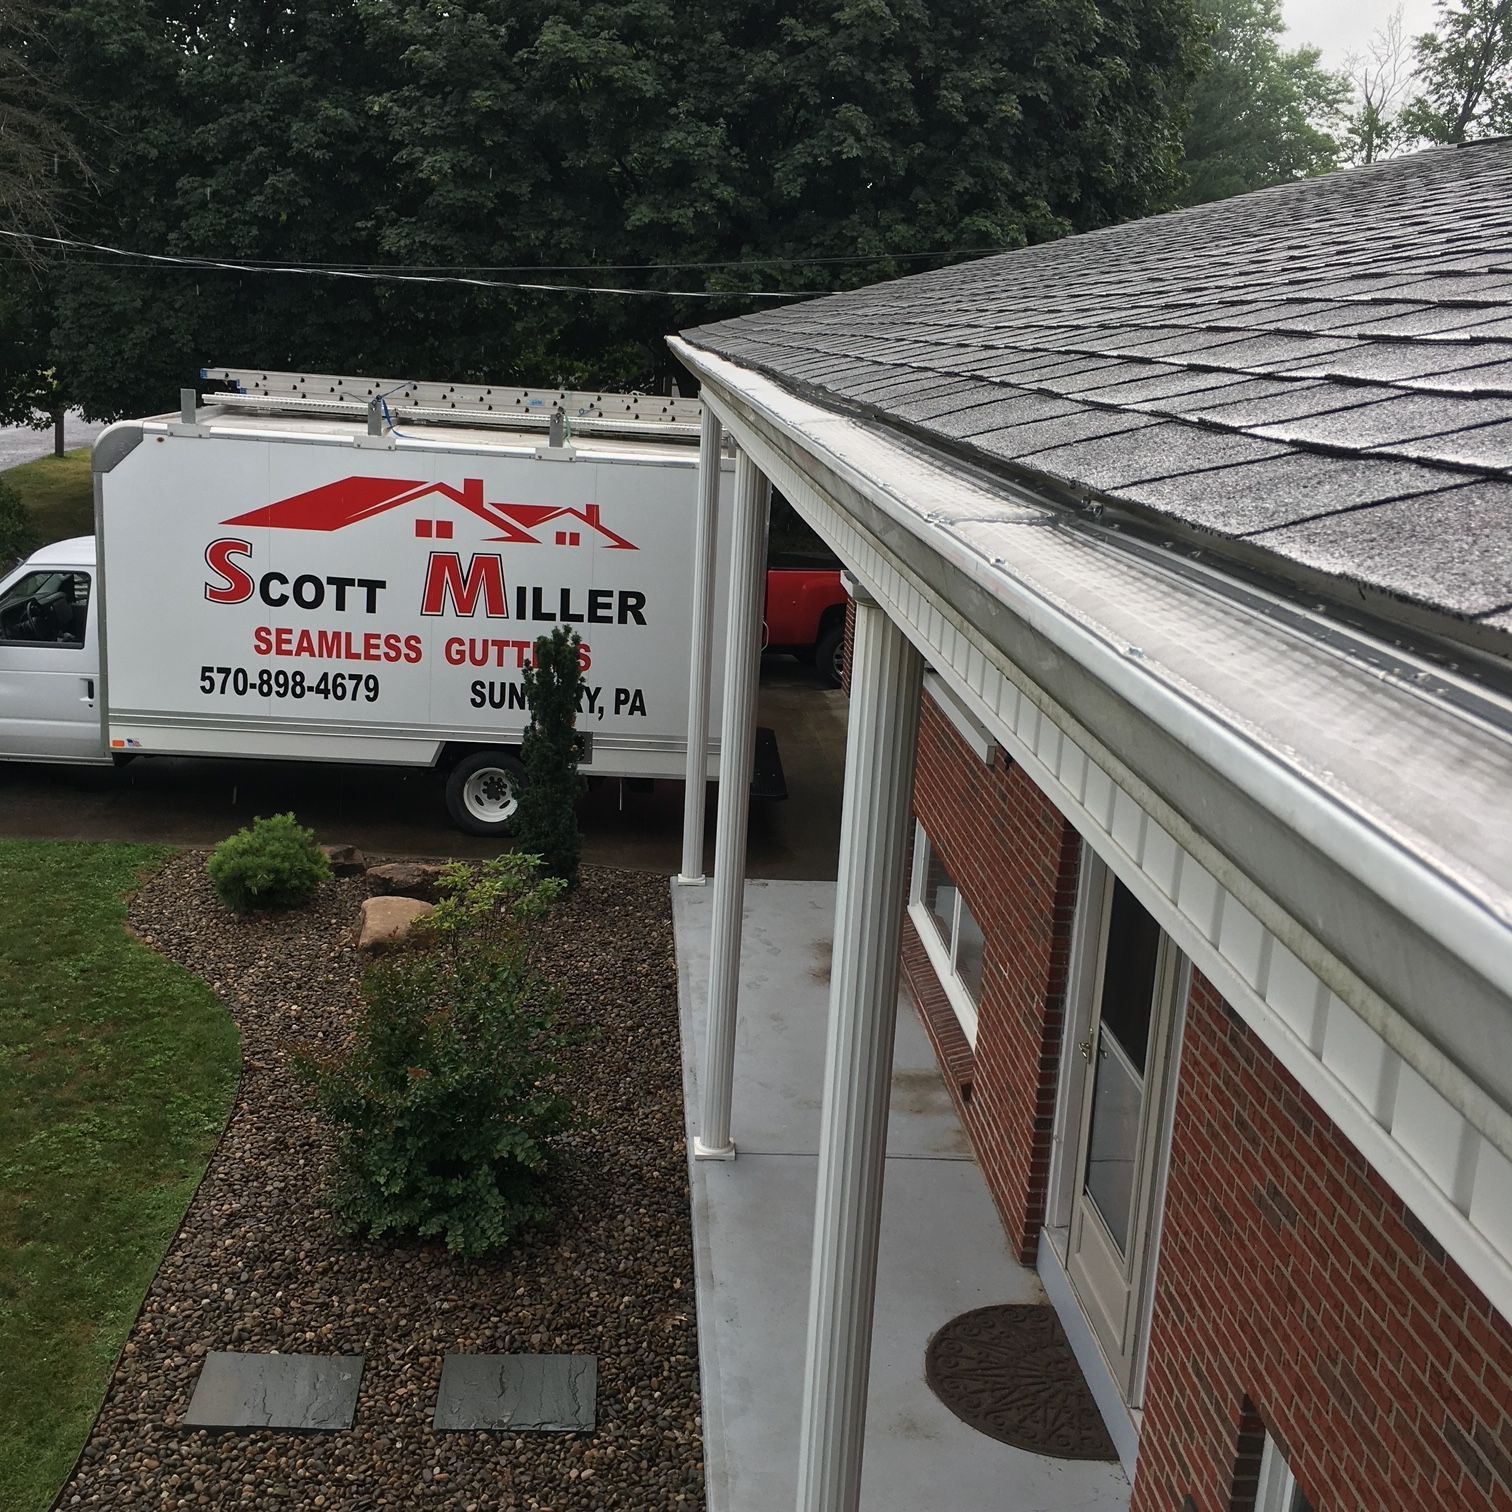 General Contracting and Seamless Gutter Services in Sunbury, Pennsylvania